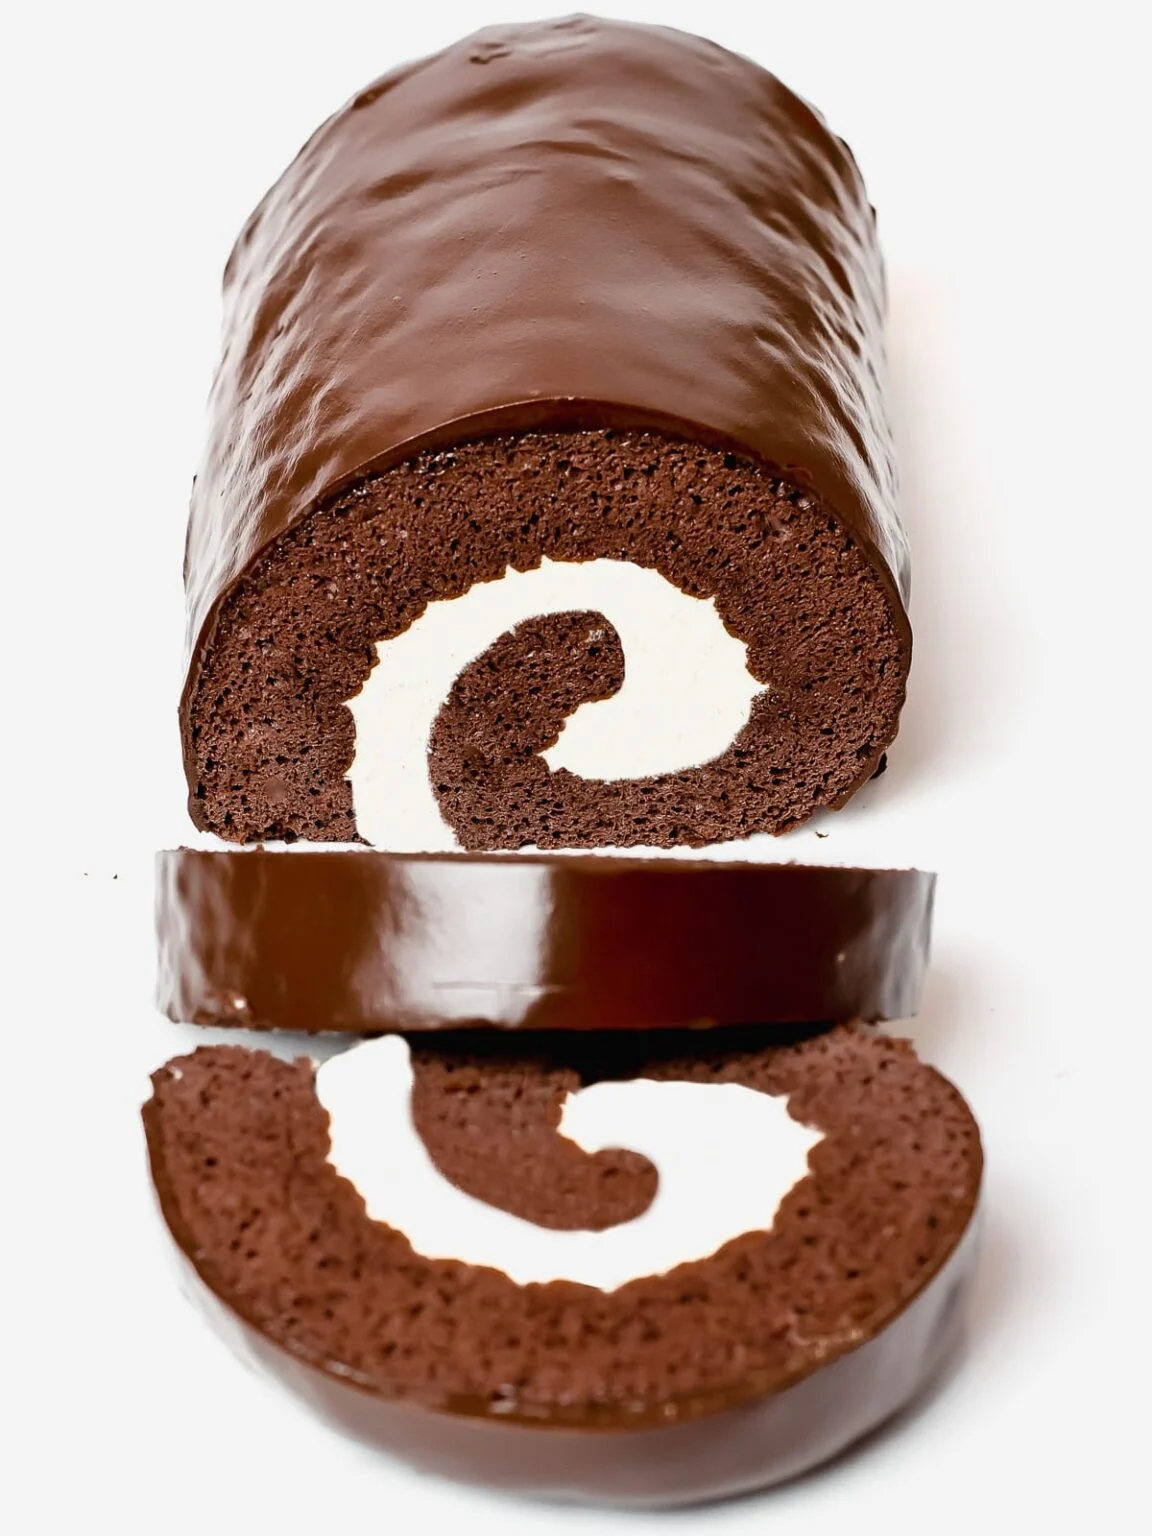 A chocolate swiss roll with two slices cut off the front and laying down.